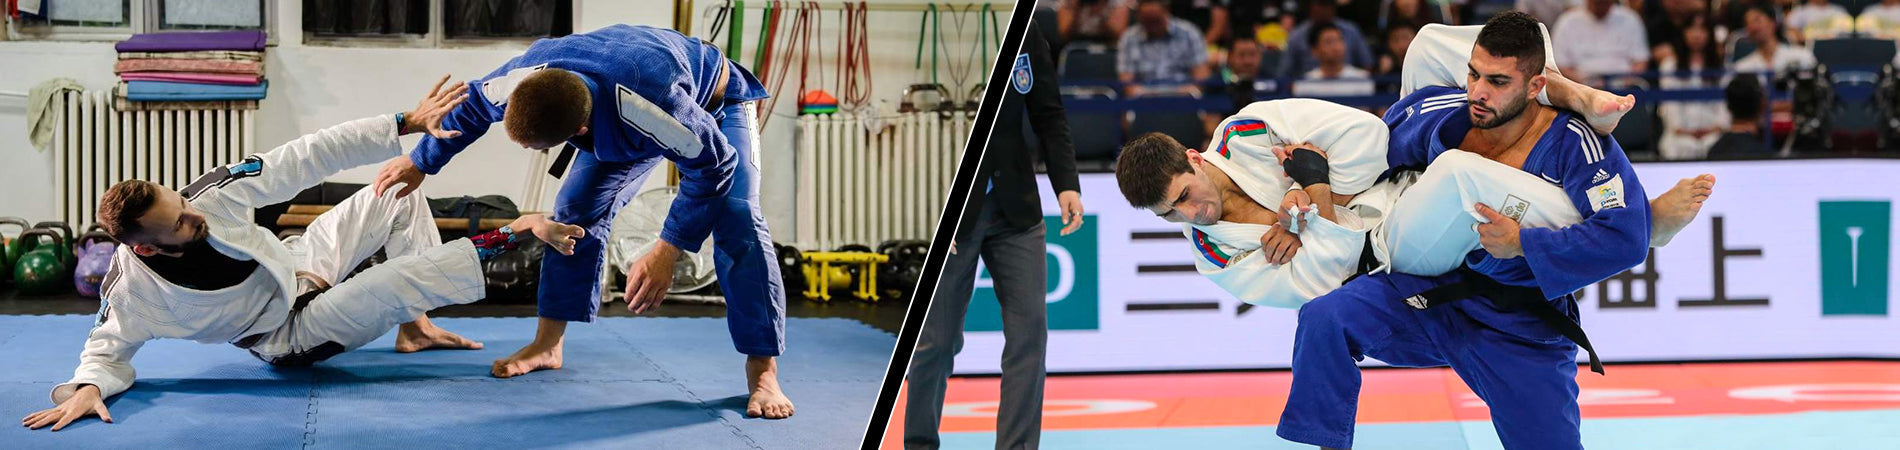 Why BJJ Will Overtake Judo and Have More Participants